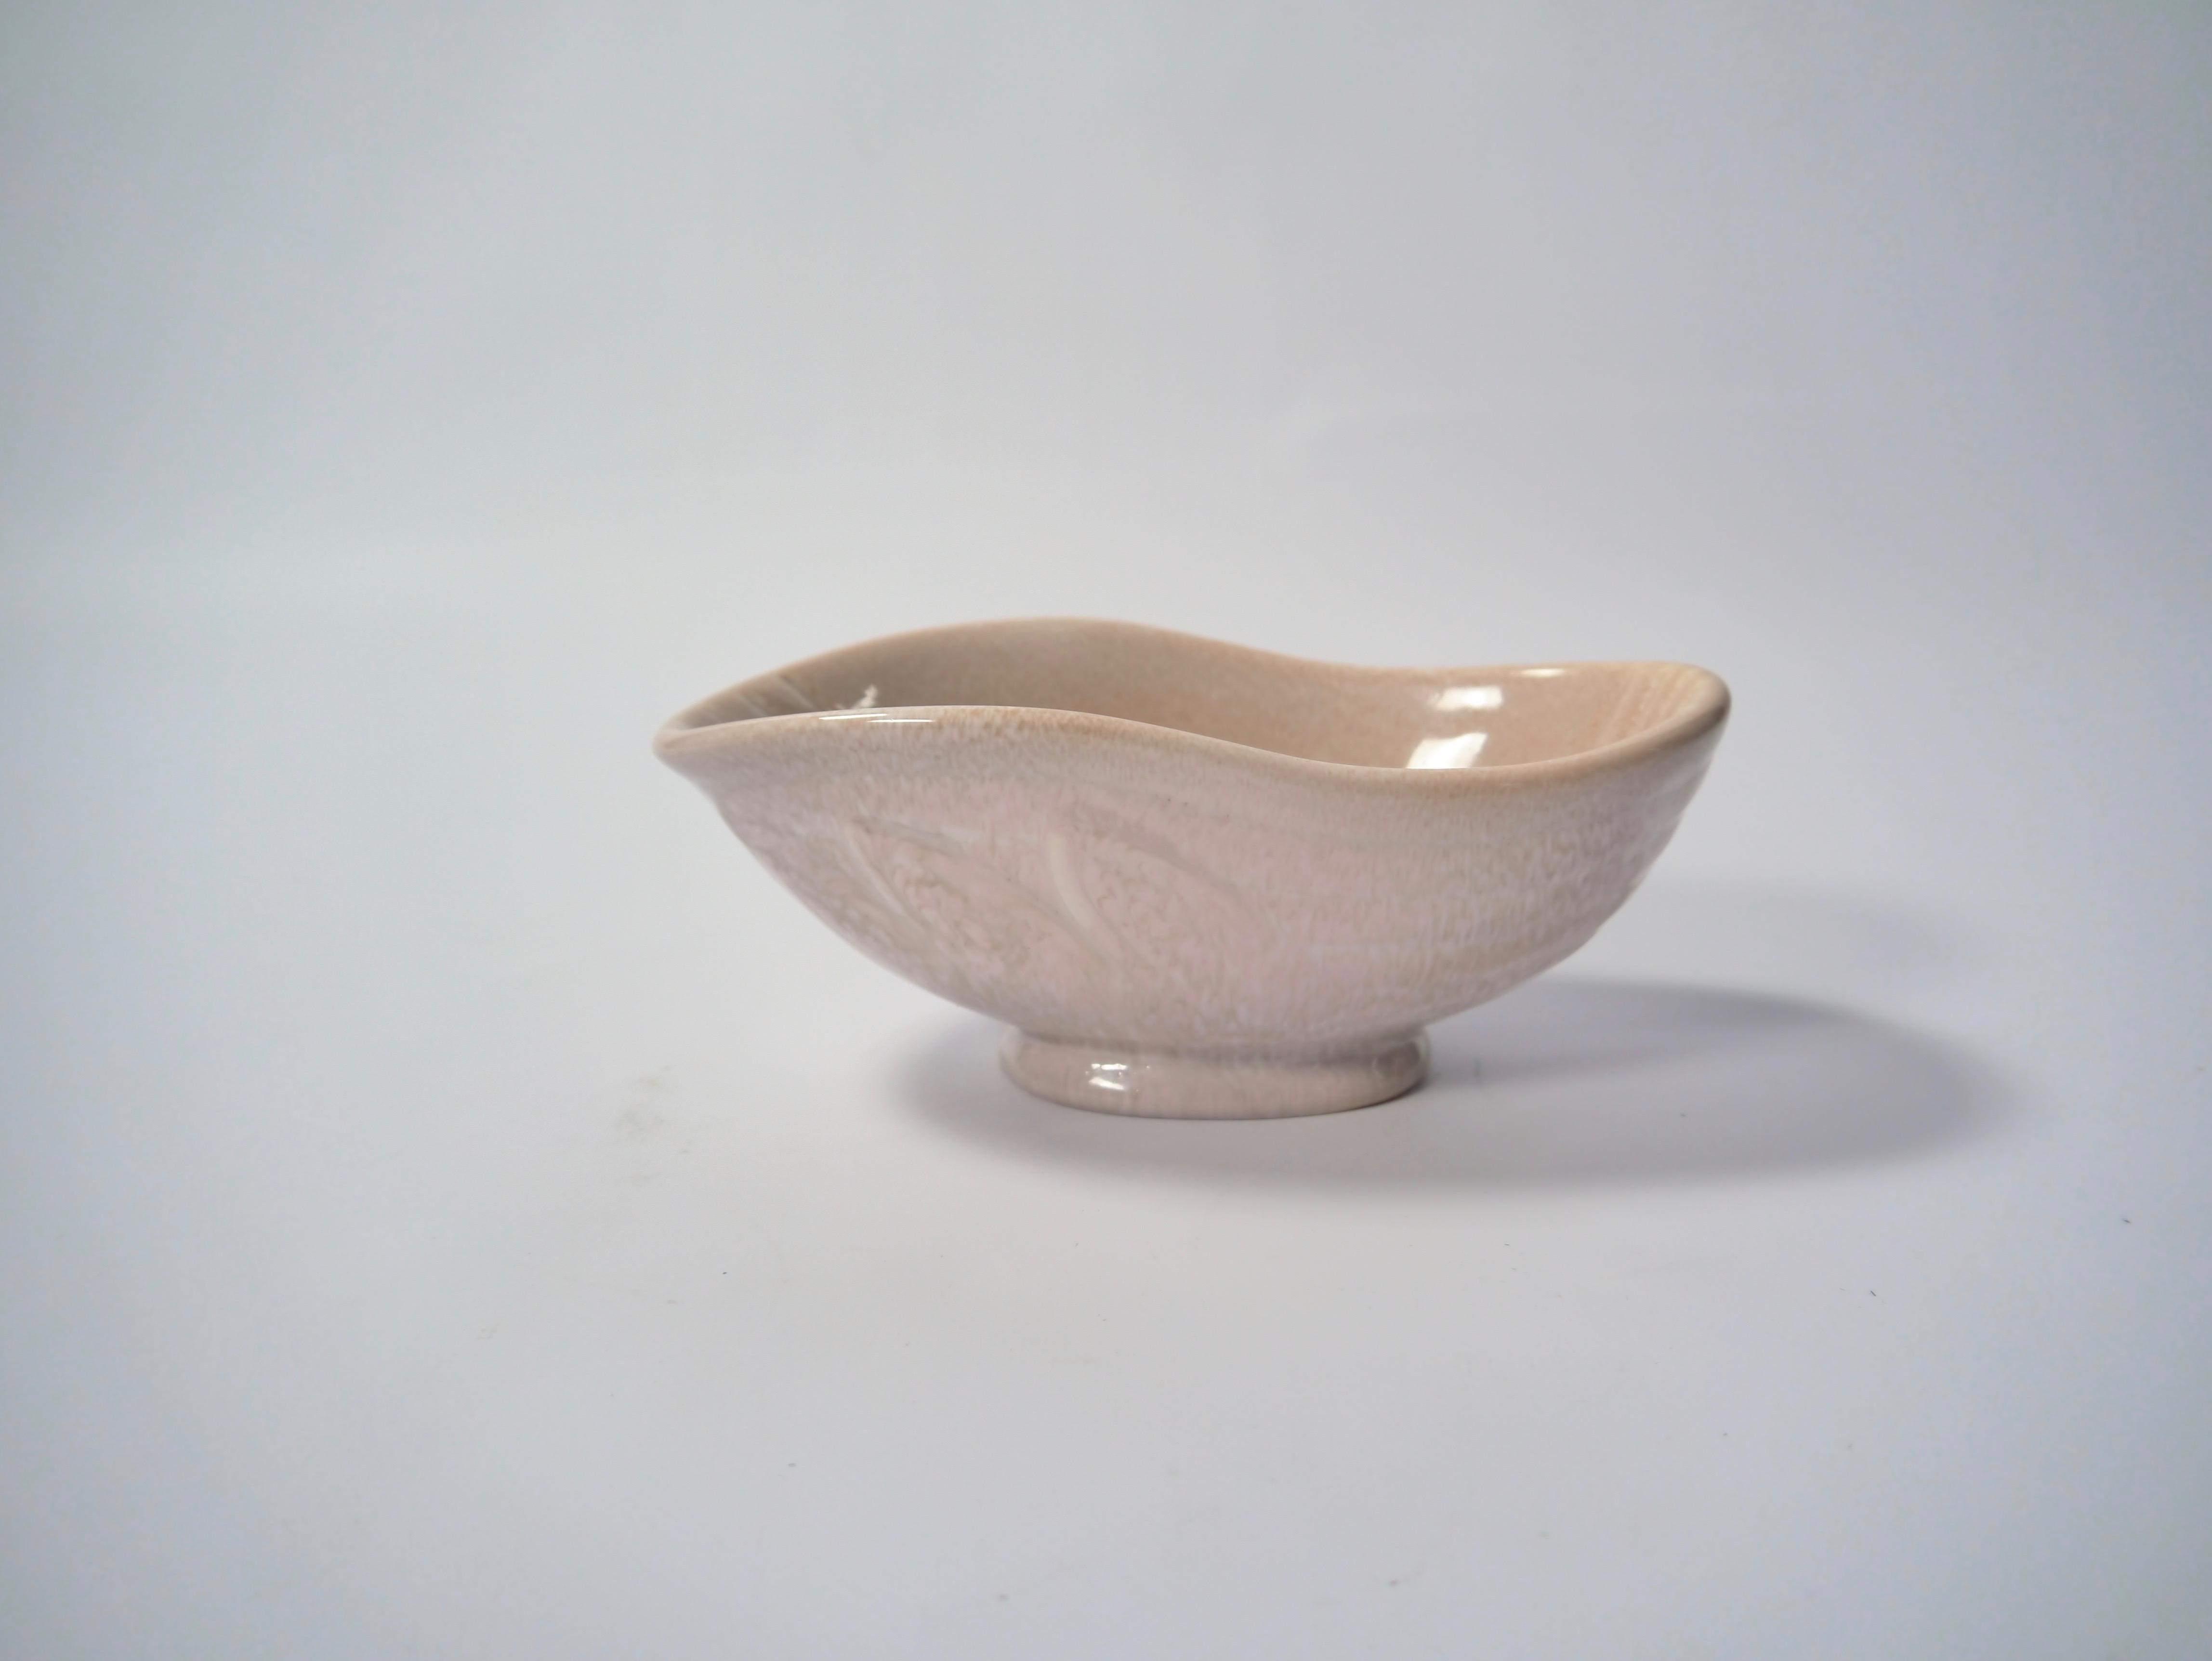 Small vanilla colored Swedish Grace ceramic bowl designed by Gunnar Nylund for Rörstrand, Sweden, 1930s.